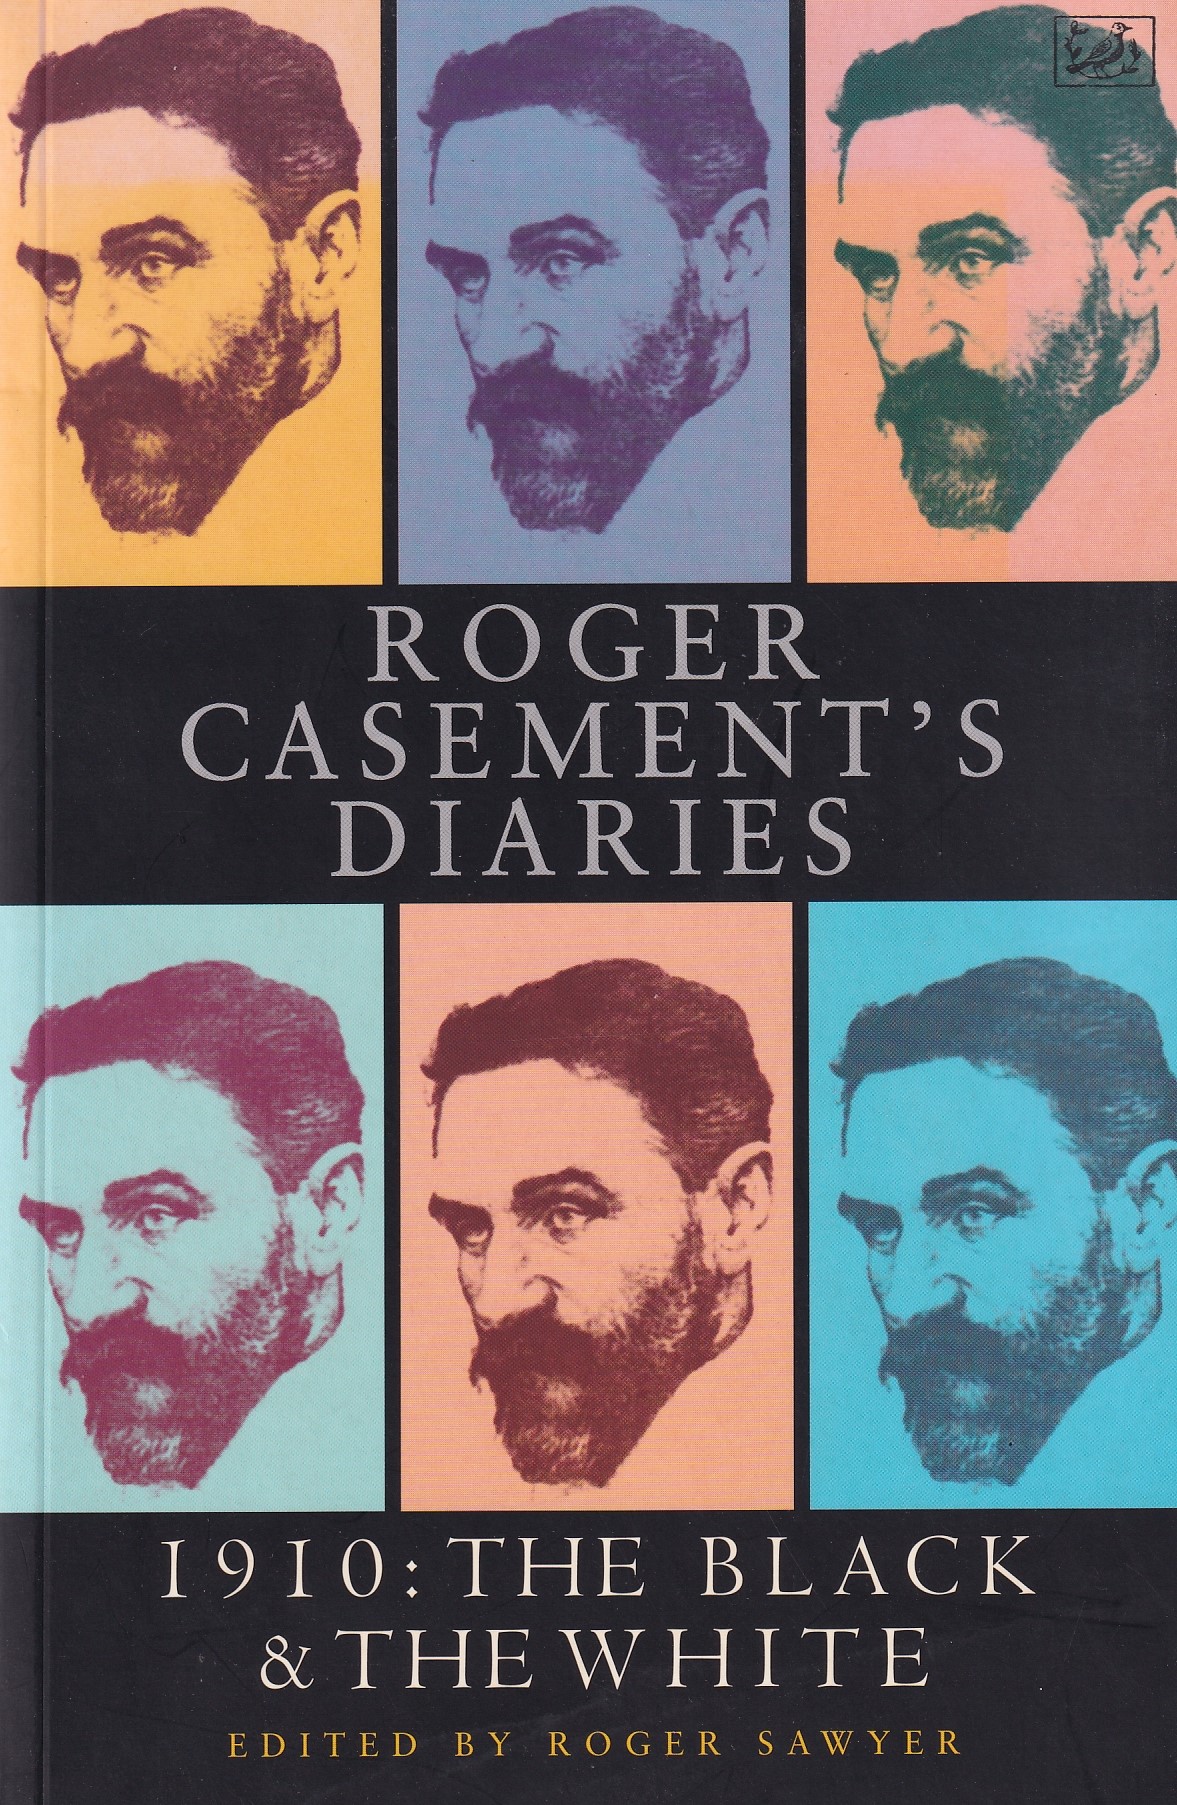 Roger Casement’s diaries: 1910: the black and the white / edited by Roger Sawyer by Casement, Roger (1864-1916); Sawyer, Roger